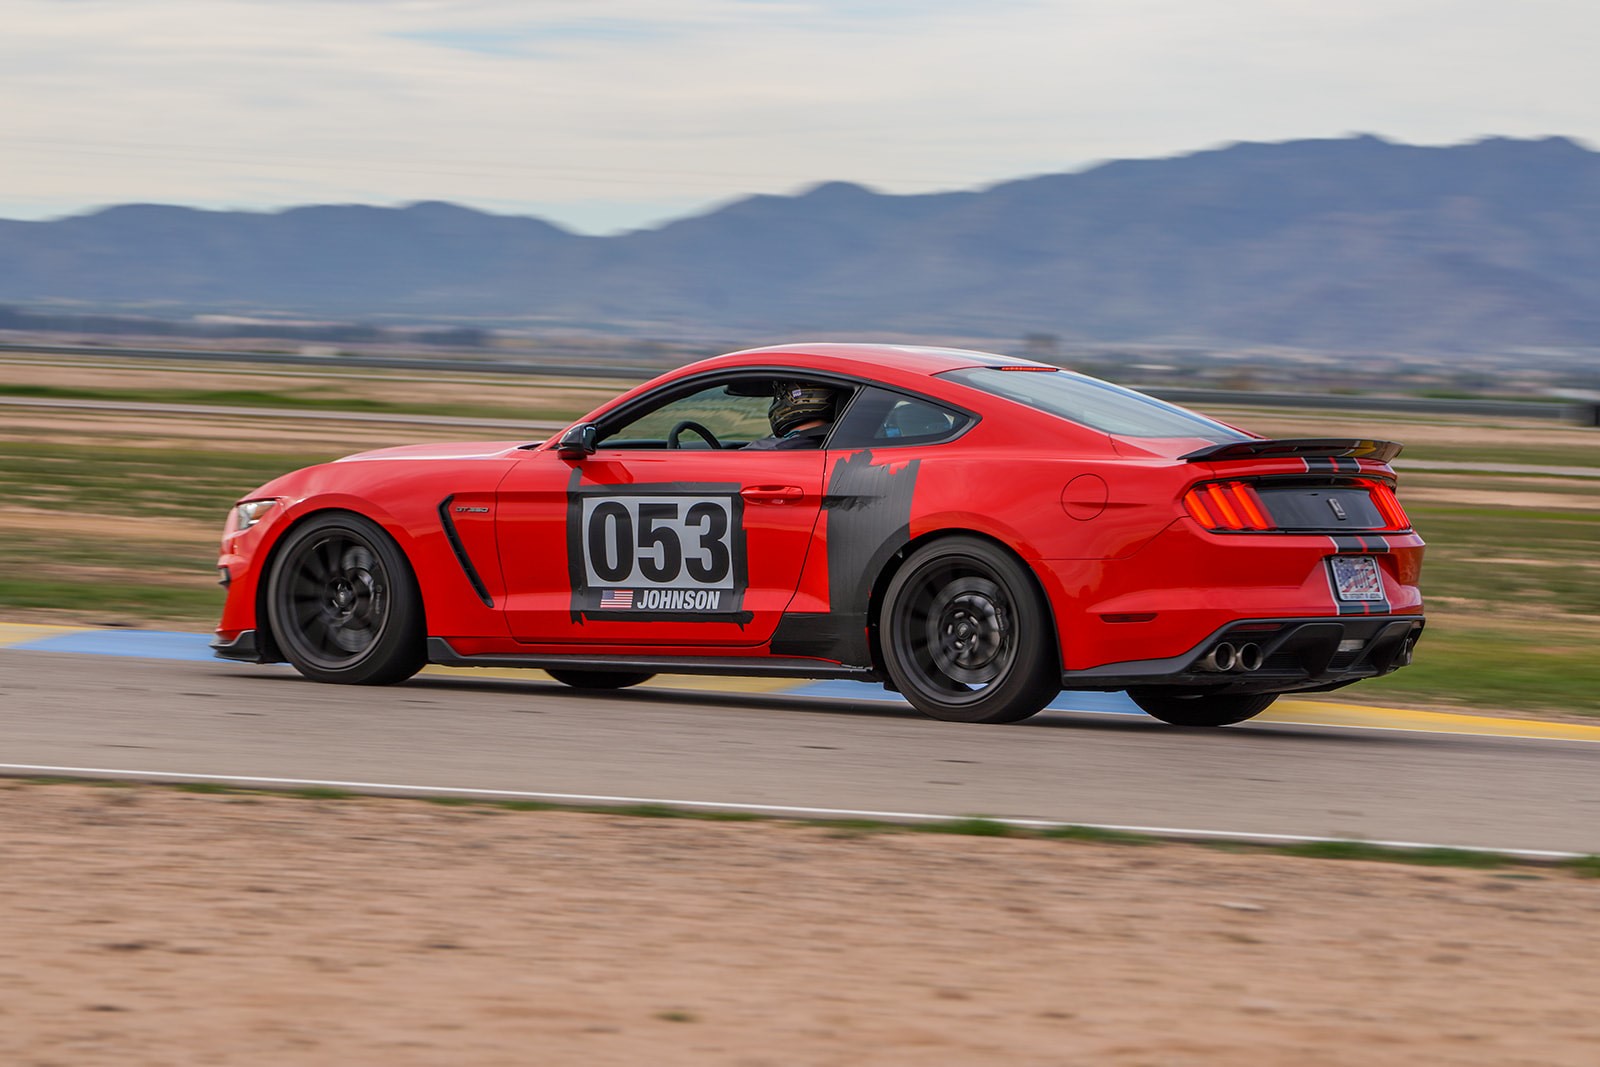 2016 Mustang
GT350 HPDE/Track -  (Light Duty Auto-X and HPDE Street Car)